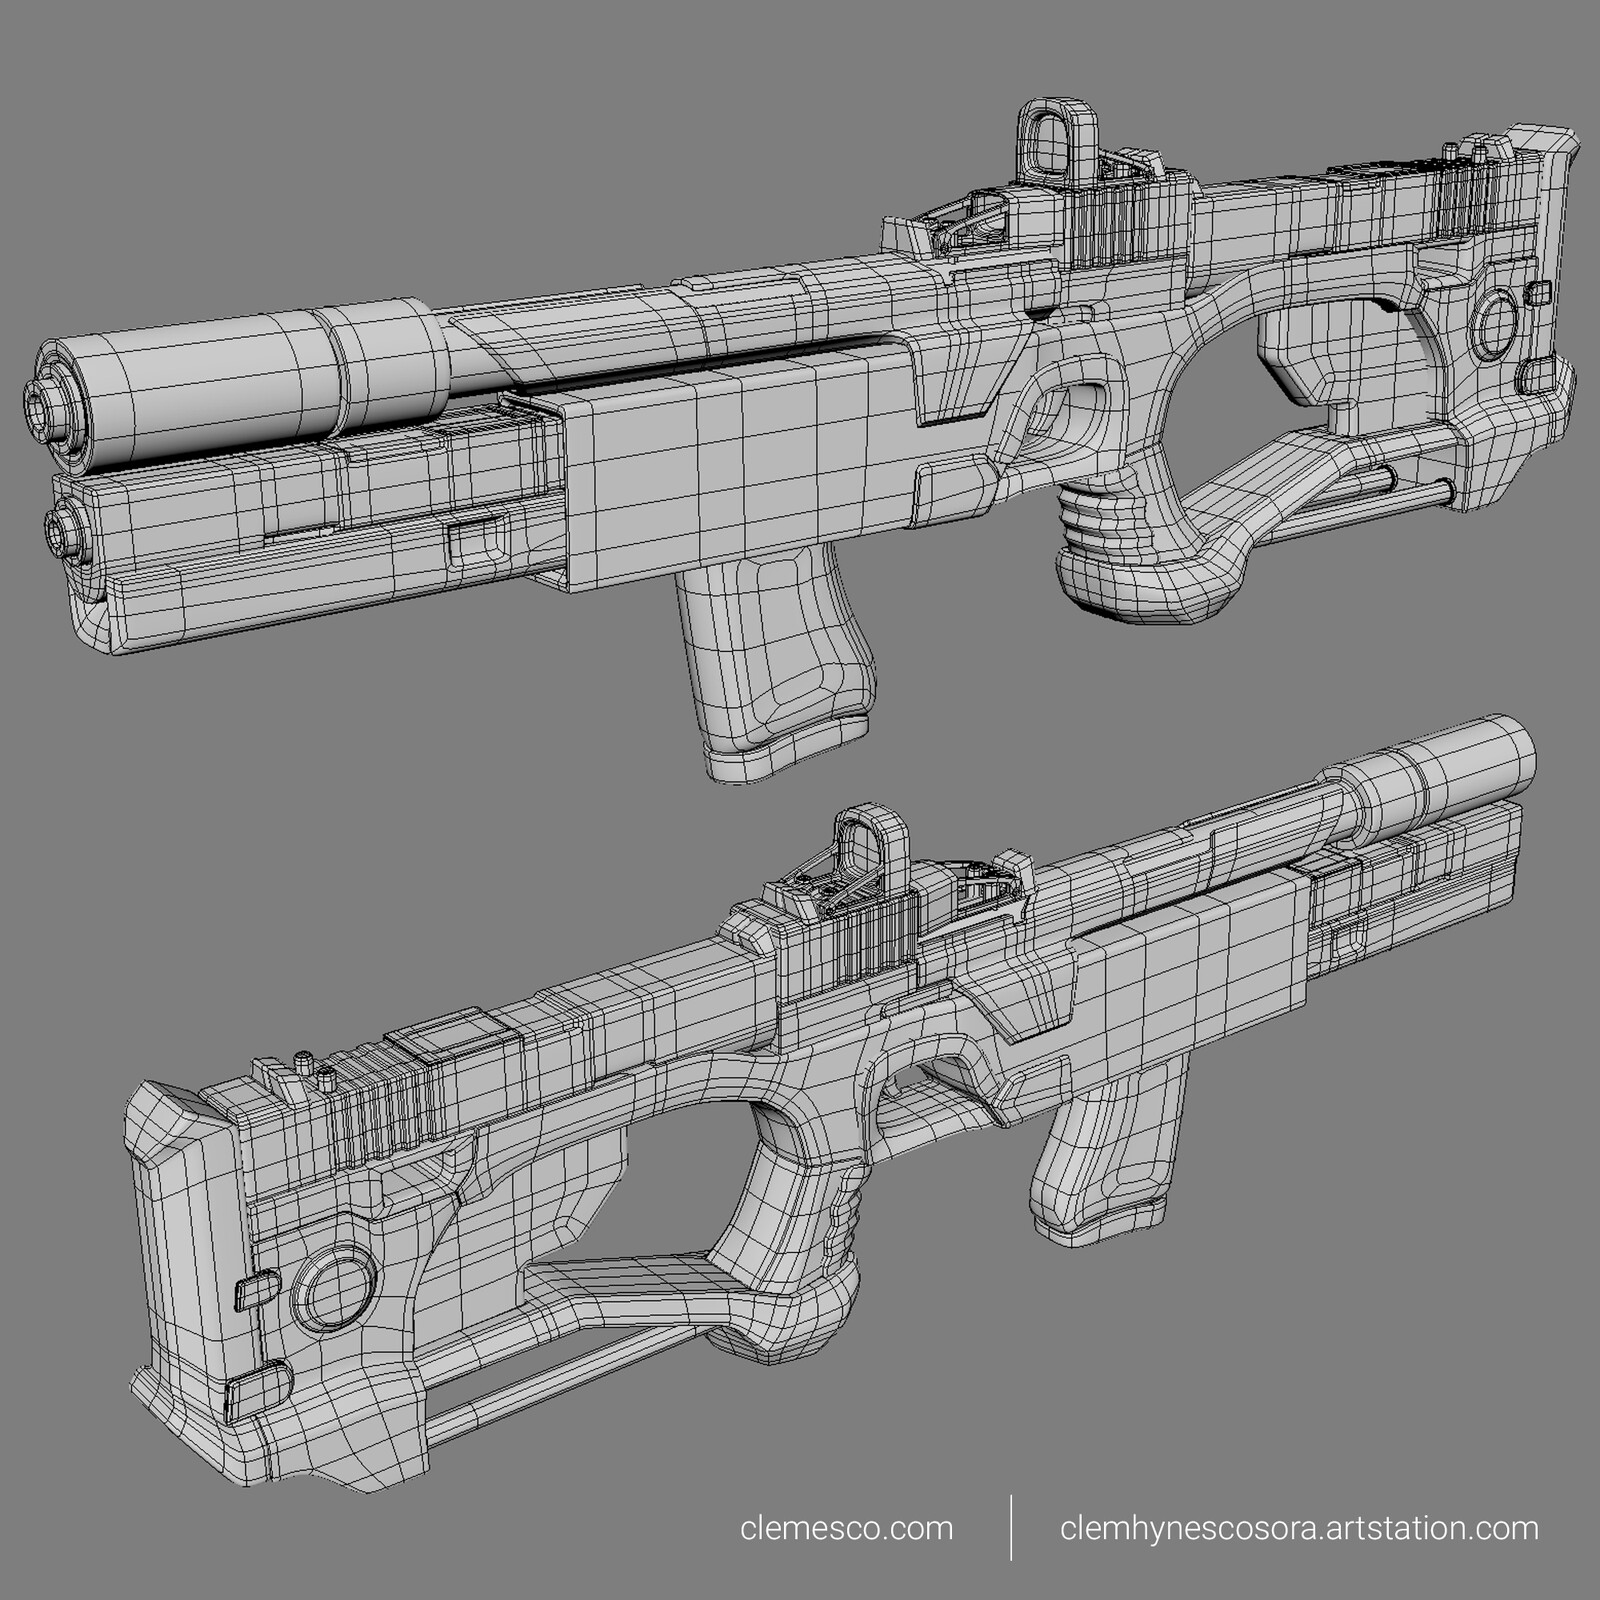 sci-fi gun. weapon for my upcoming character. concept art design.